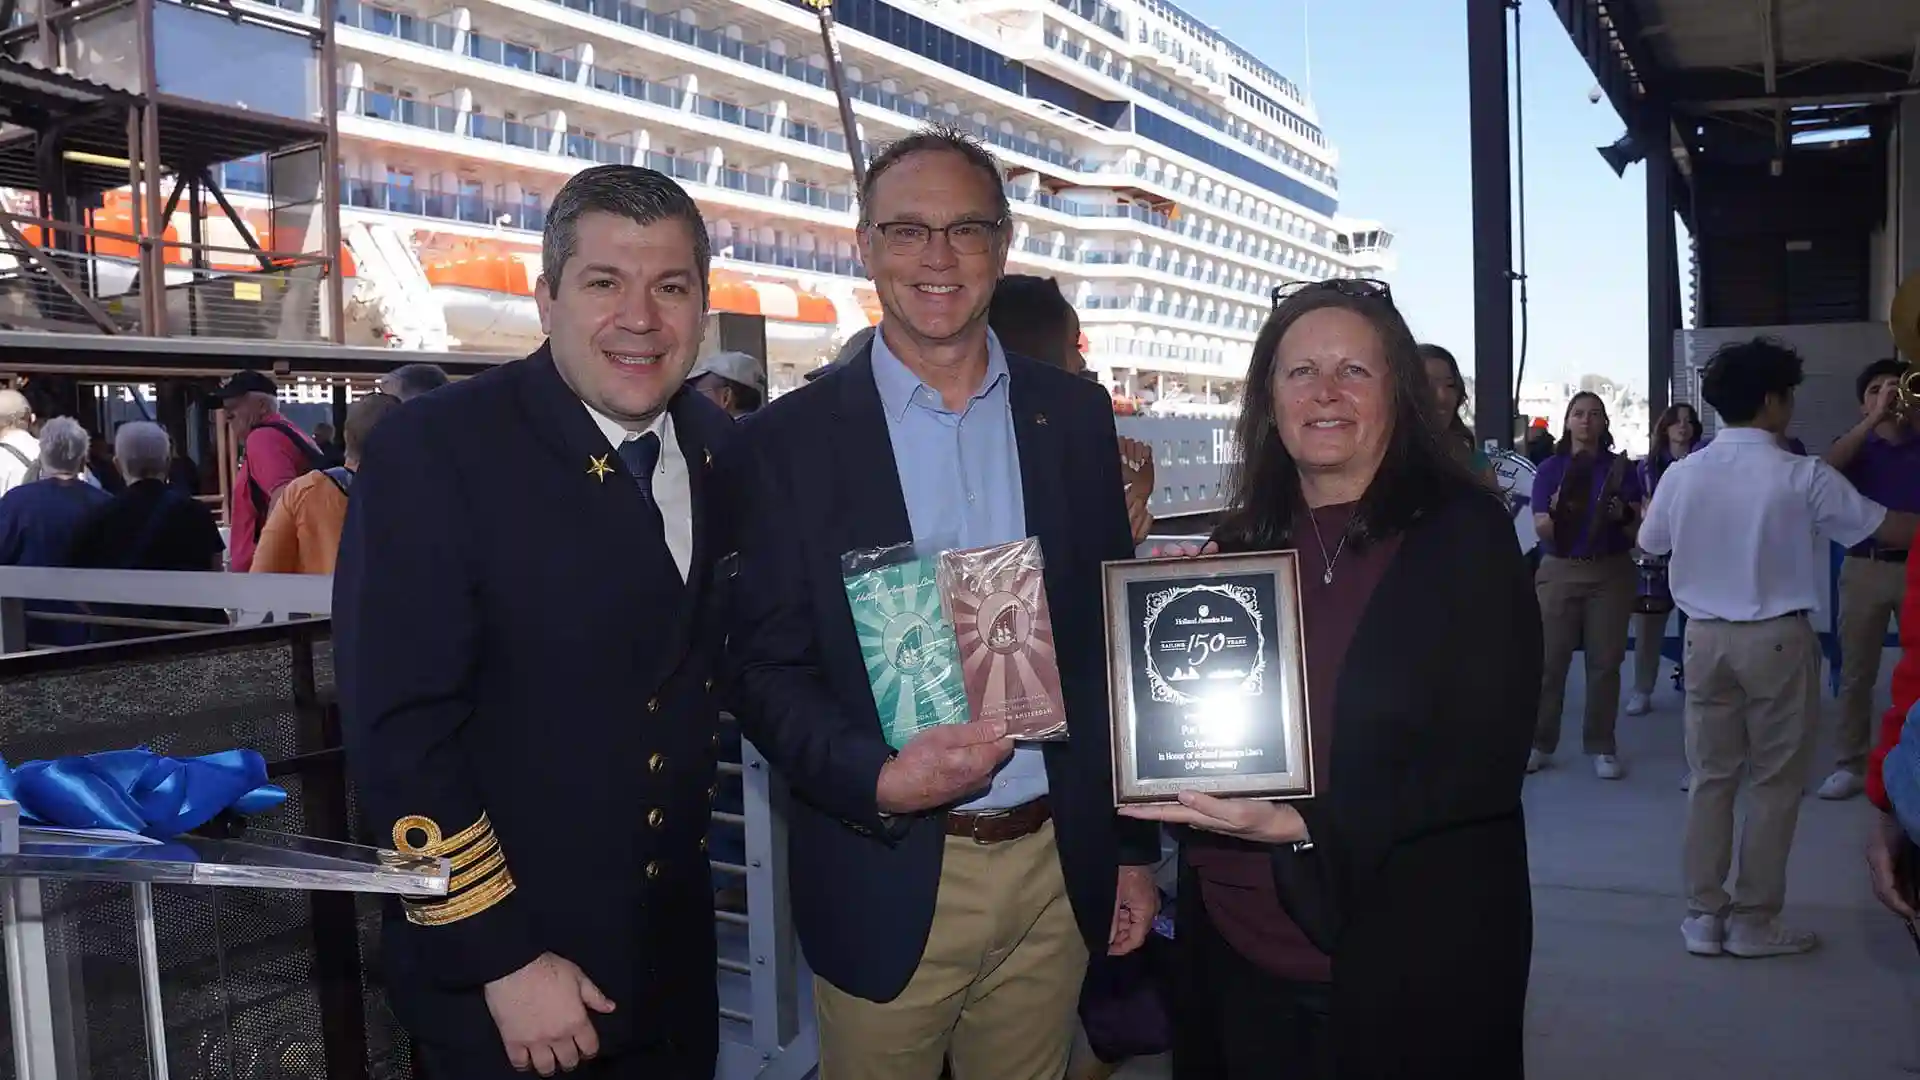 View of people holding Holland America Line 150th Anniversary plaque.